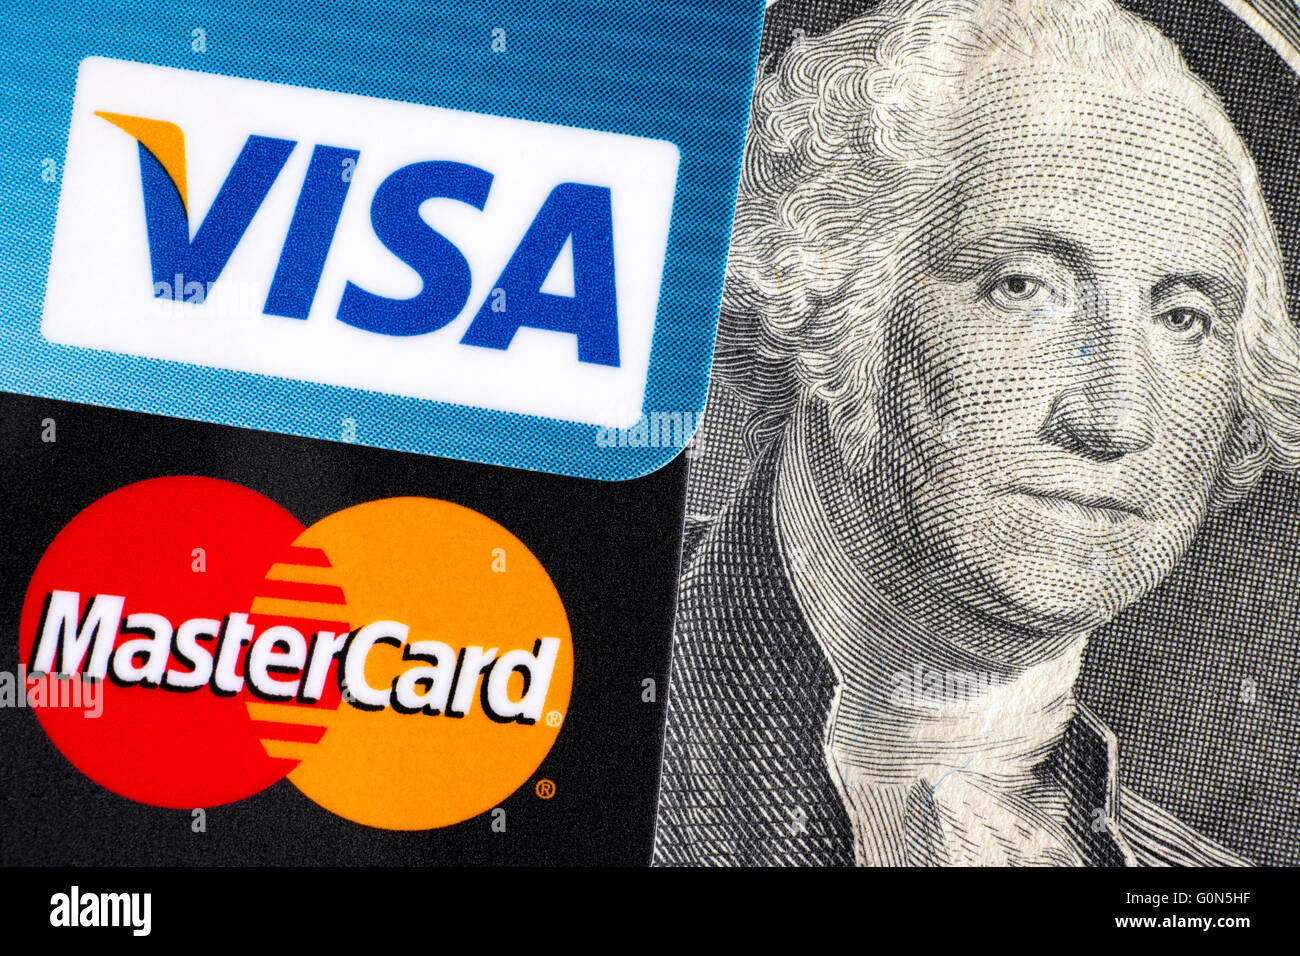 Visa and MasterCard logo on credit cards on one dollar bill with George Washington portrait Stock Photo